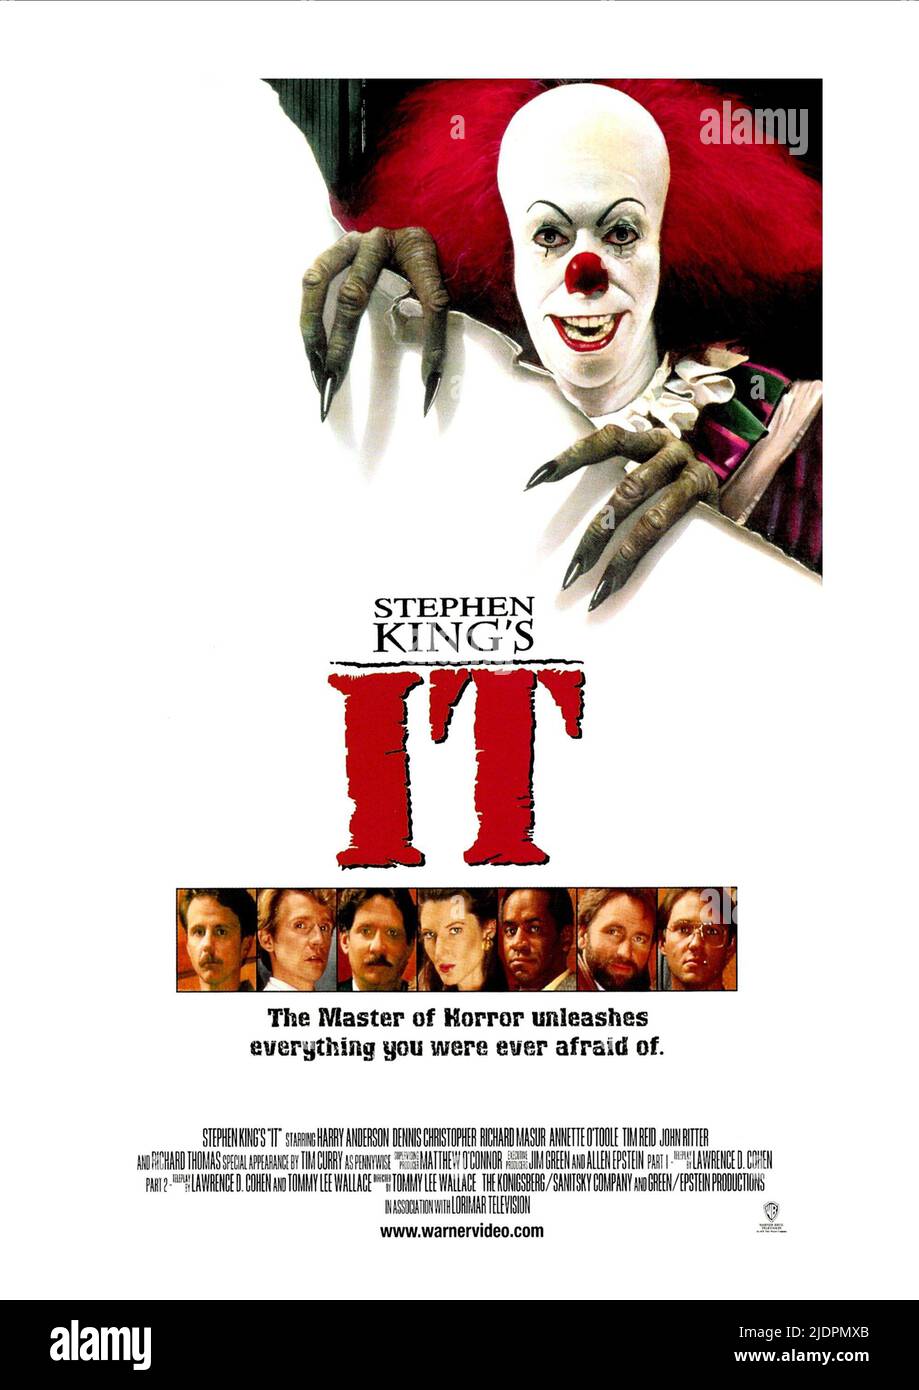 CURRY,ANDERSON,CHRISTOPHER,MASUR,O'TOOLE,REID,RITTER,AFFICHE, STEPHEN KING'S IT, 1990 Banque D'Images